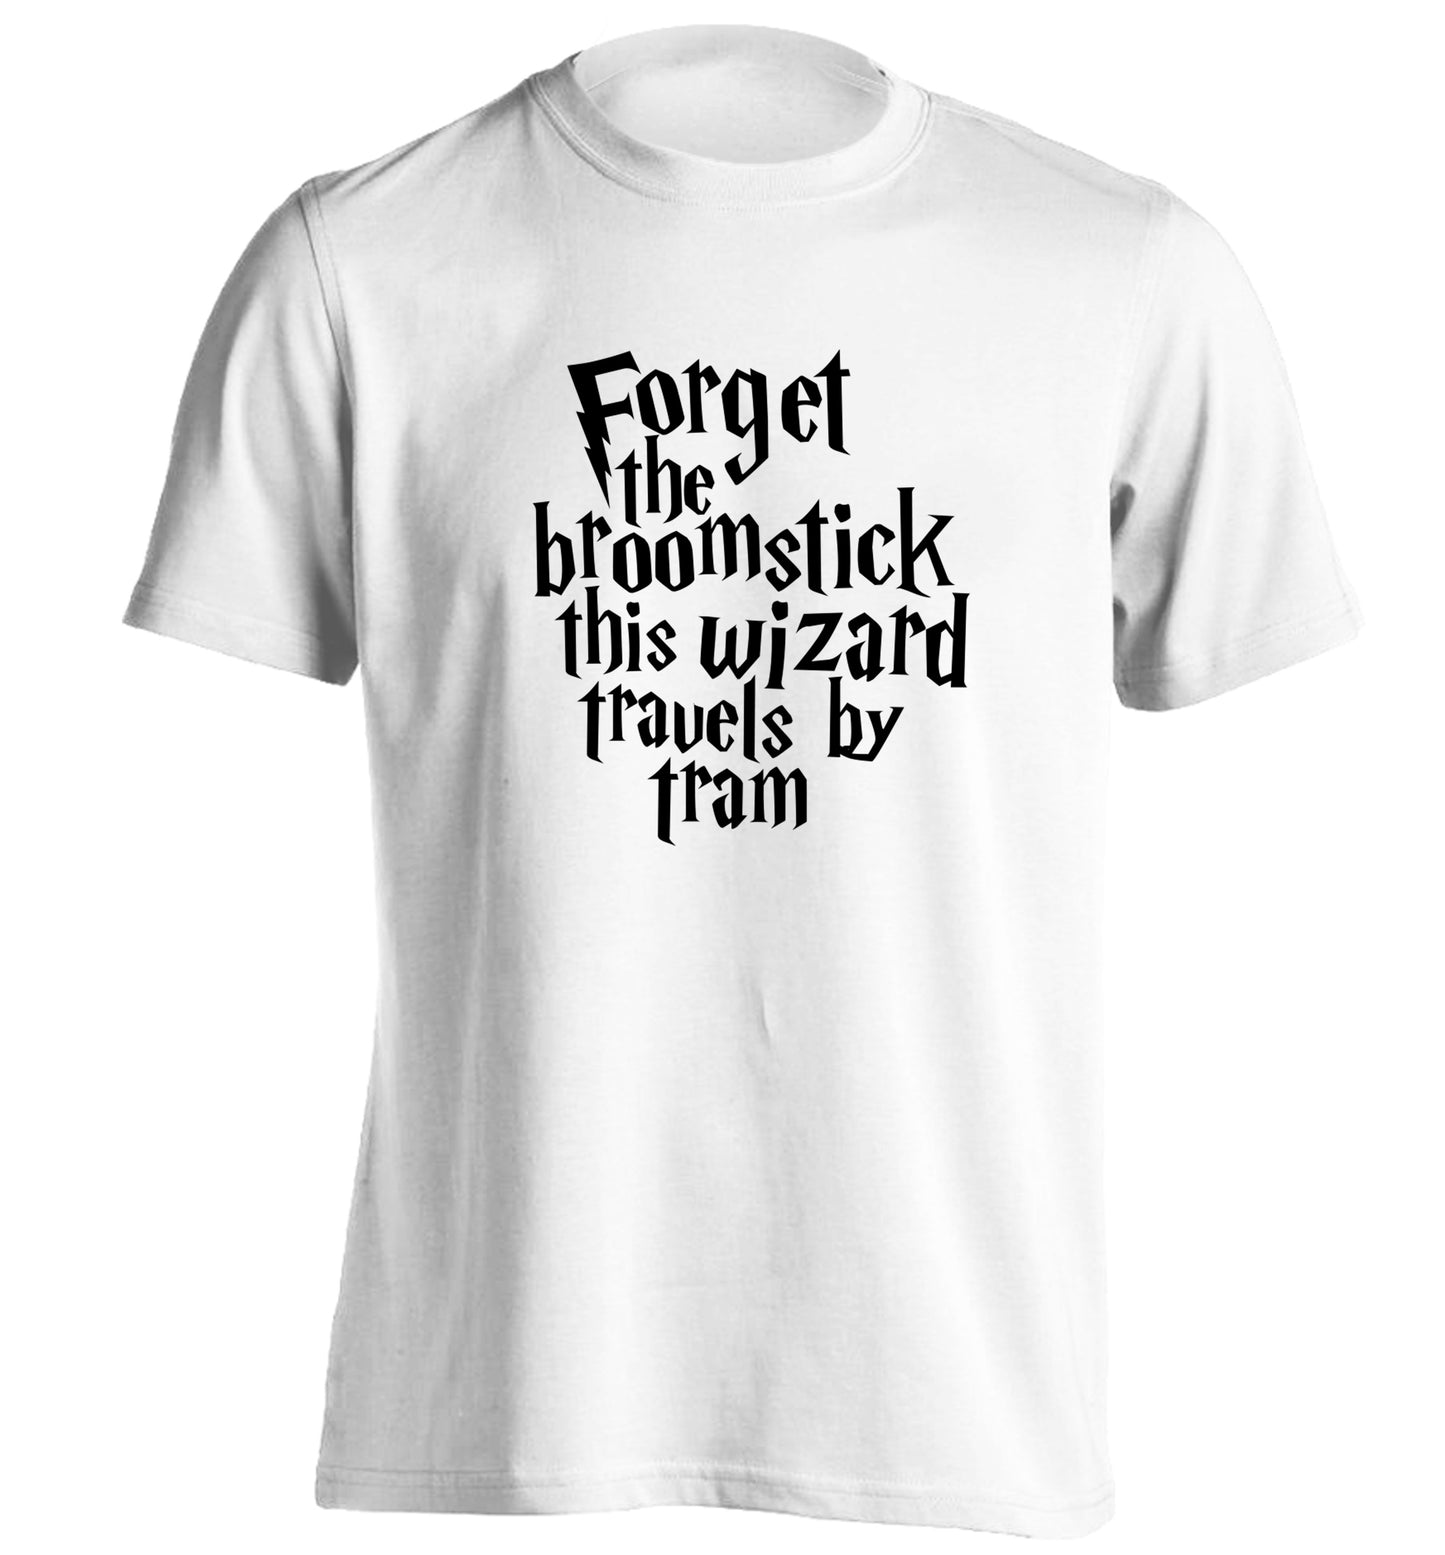 Forget the broomstick this wizard travels by tram adults unisexwhite Tshirt 2XL